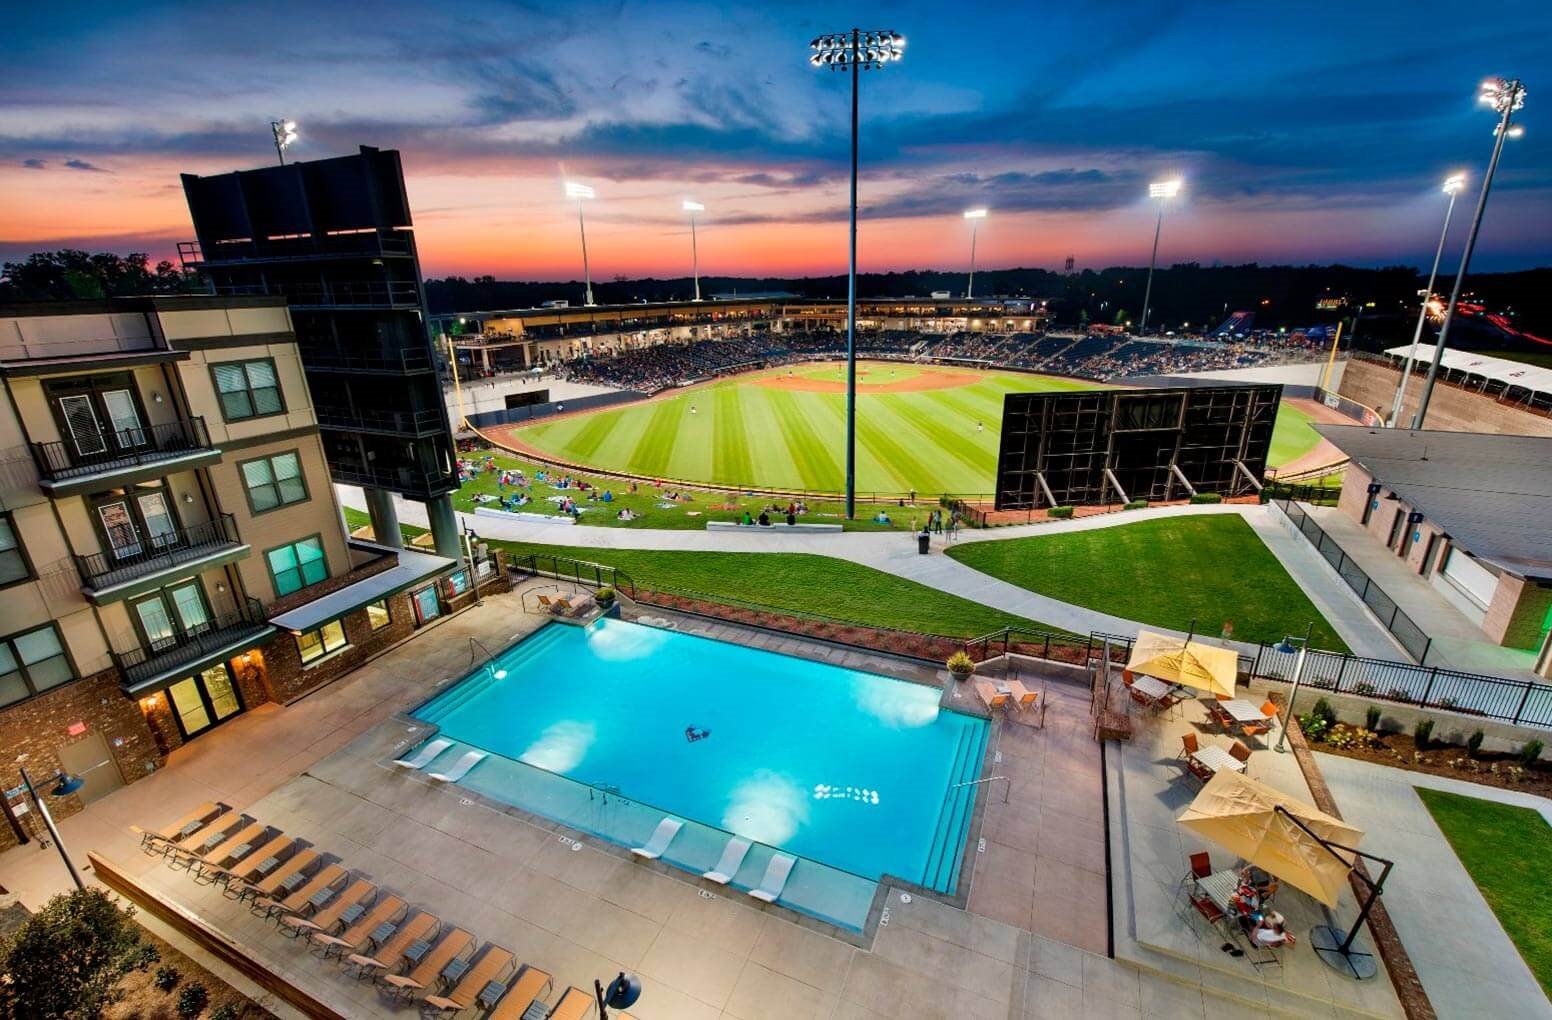 Apartments In Lawrenceville Ga The Views At Coolray Field